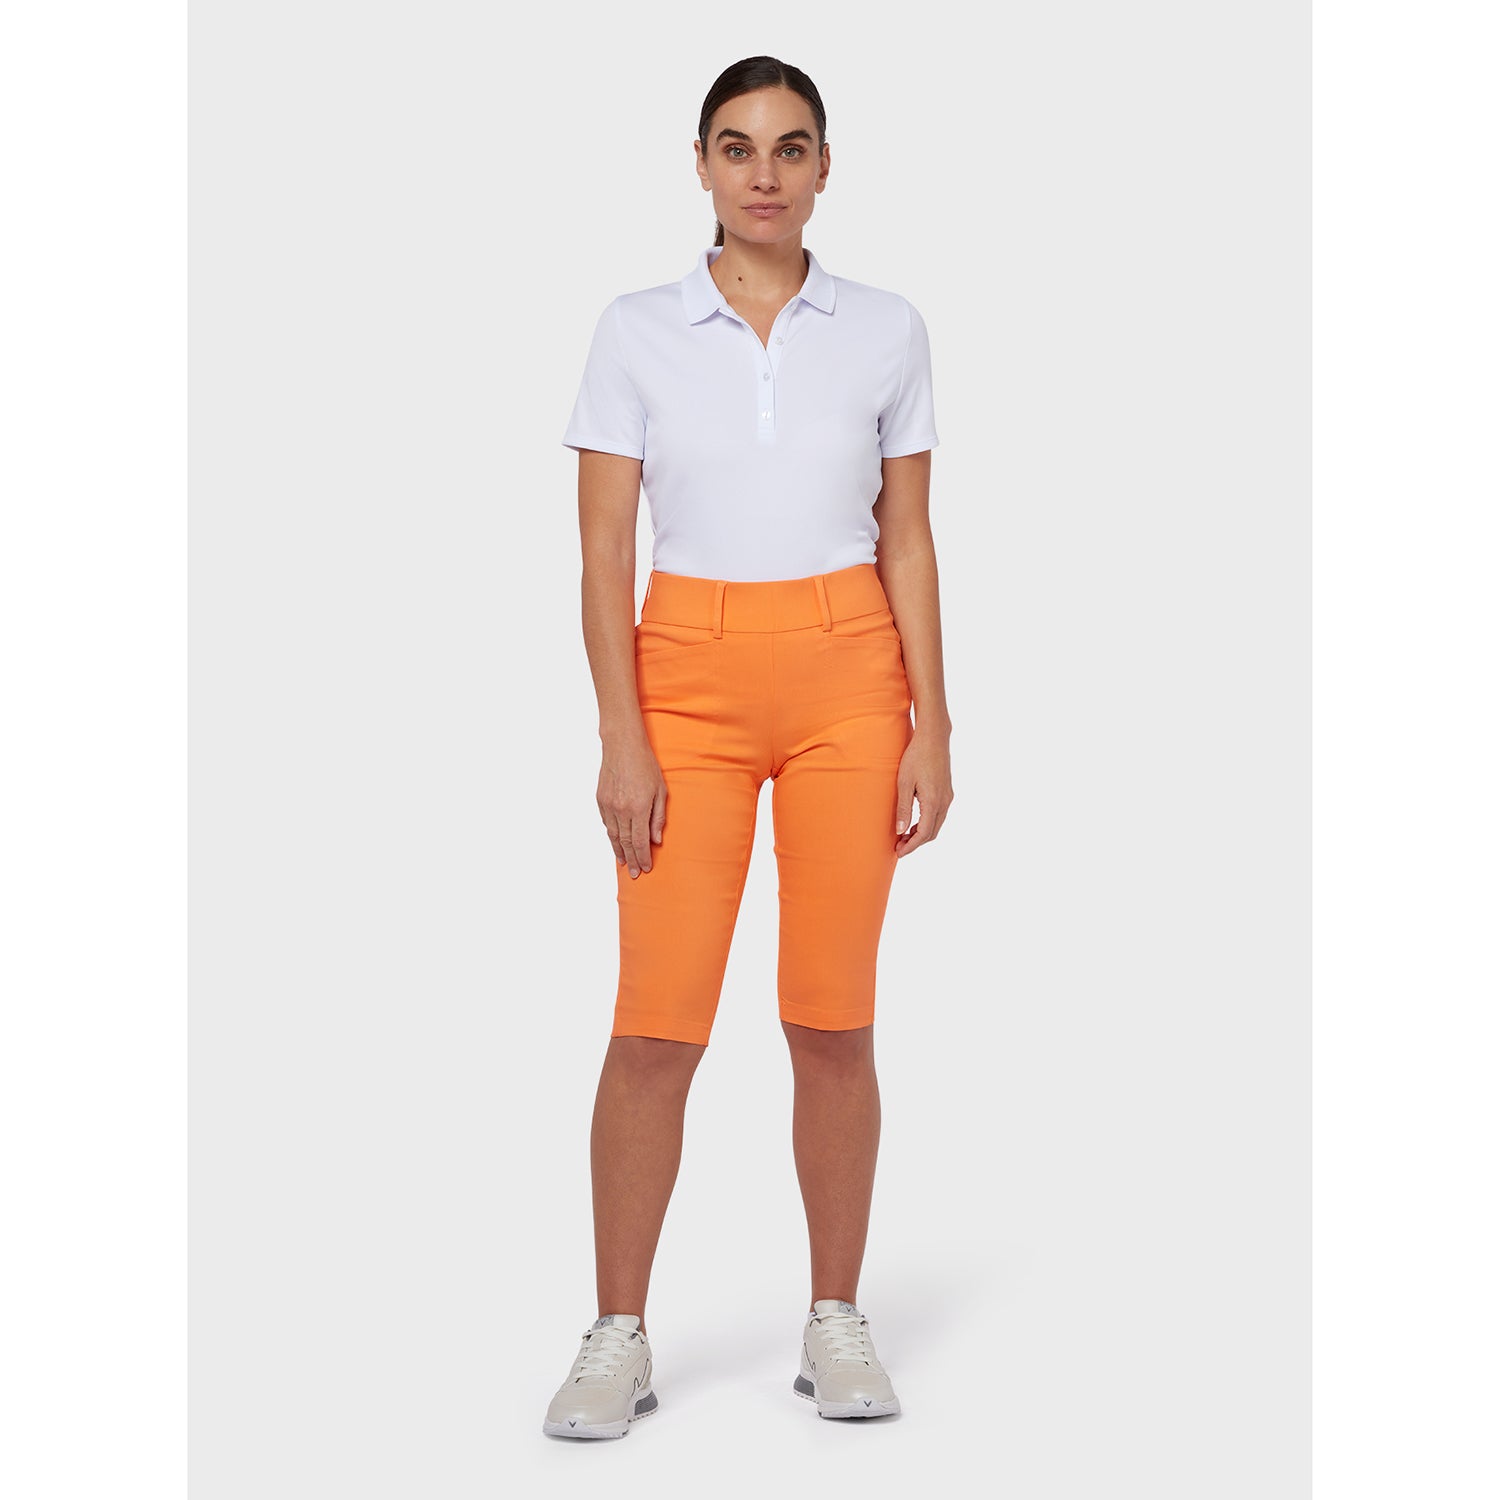 Callaway Ladies Nectarine Pull-On City Short - Small Only Left